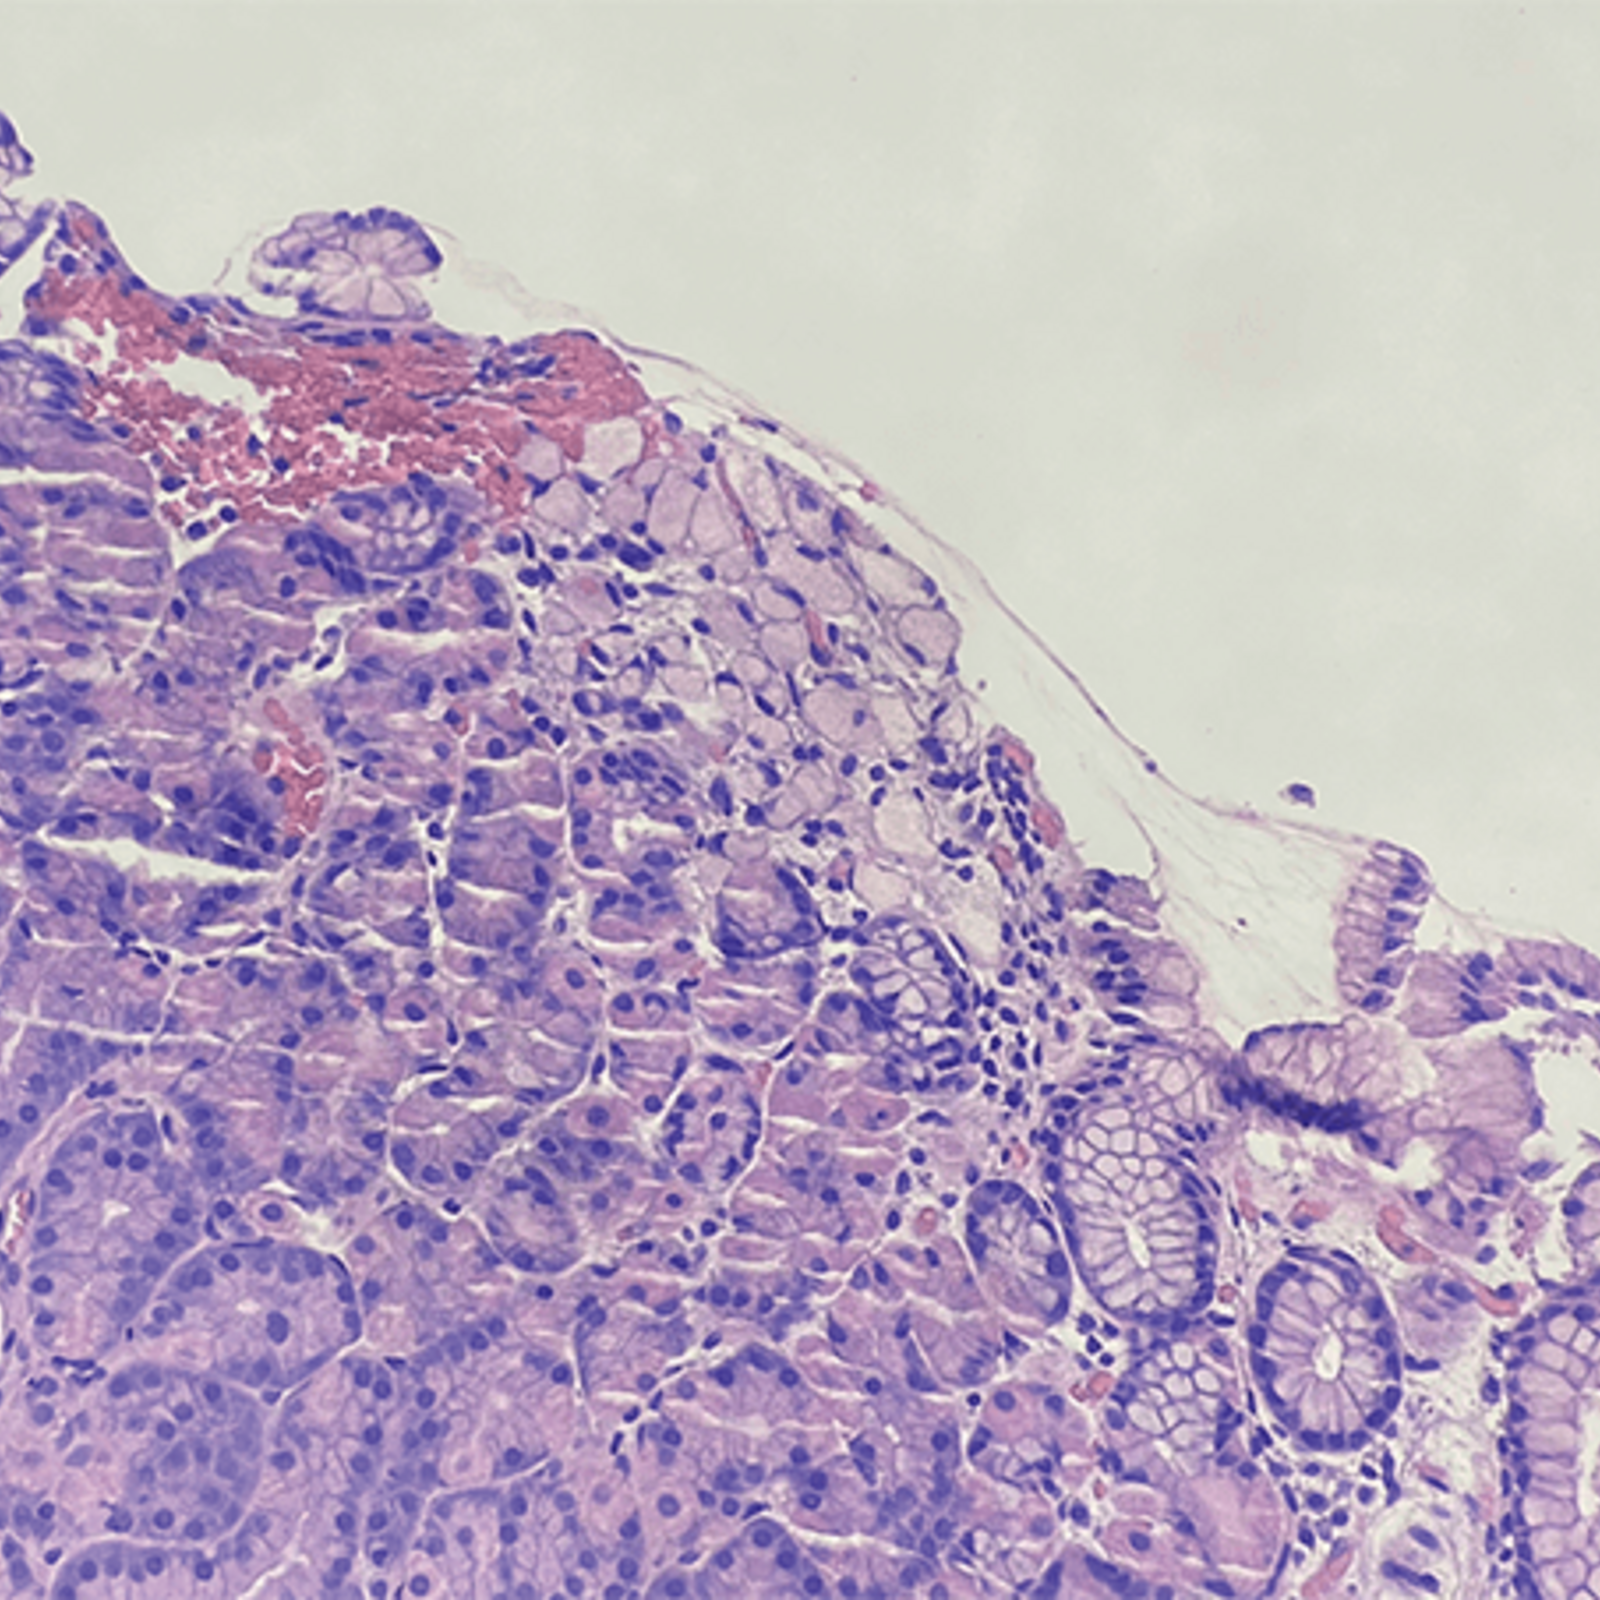 File:Signet ring cell carcinoma of the urinary bladder -- intermed mag.jpg  - Wikimedia Commons